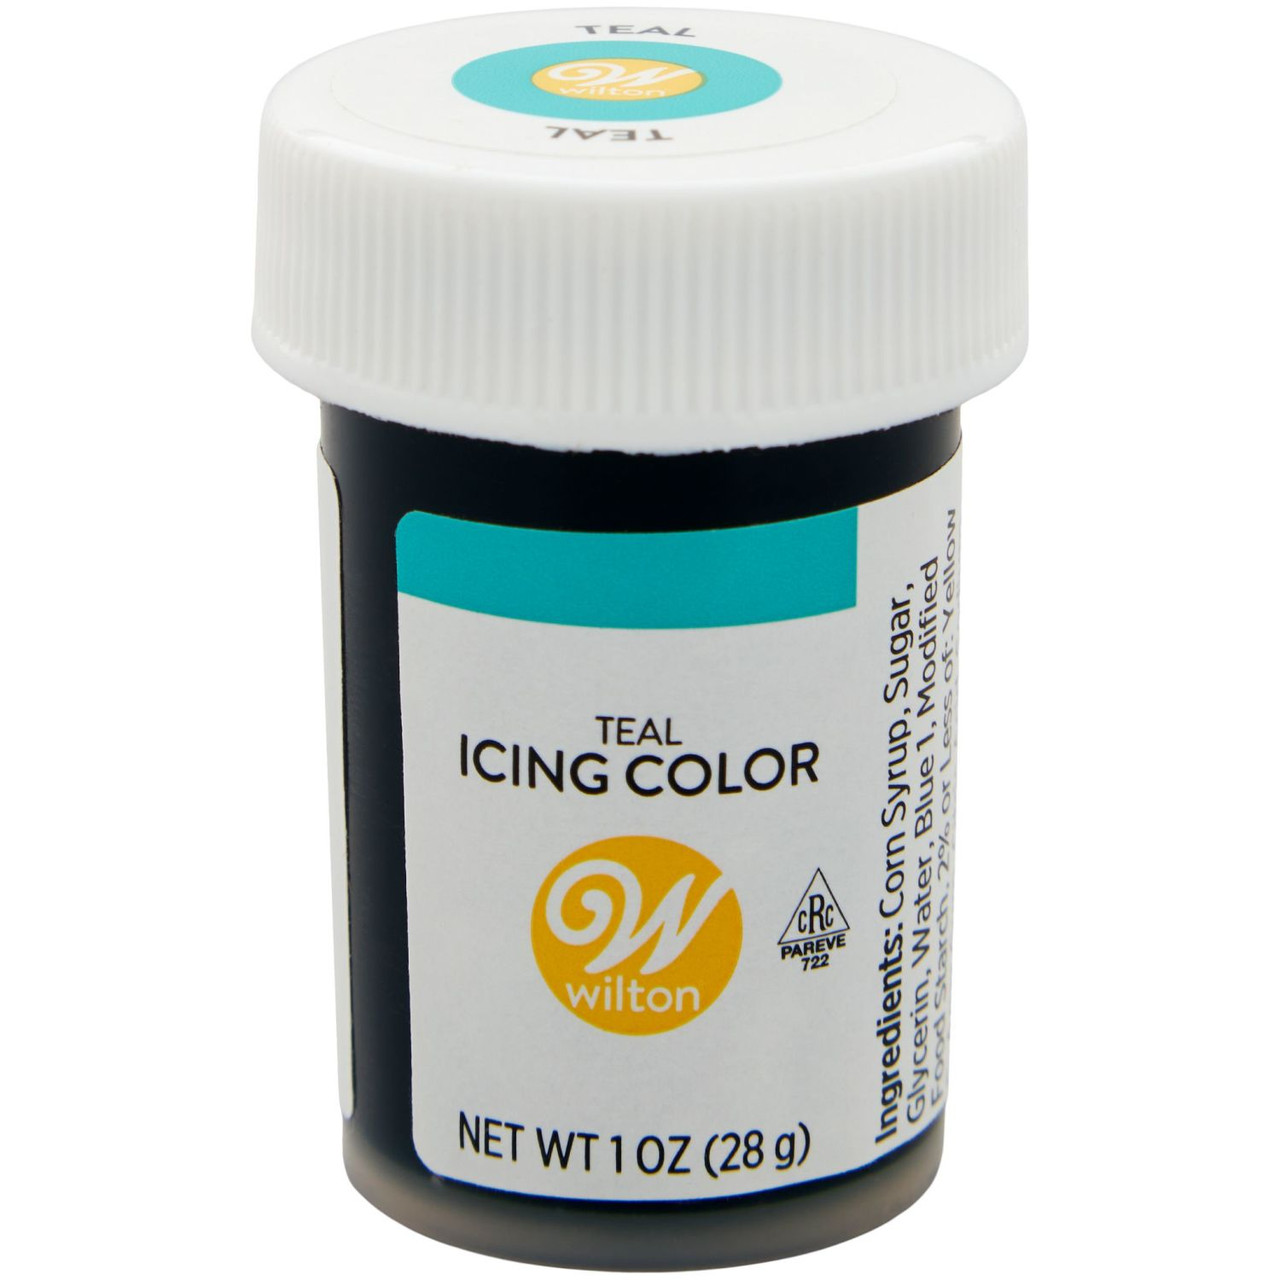 Wilton - Teal 1-oz. Icing Color